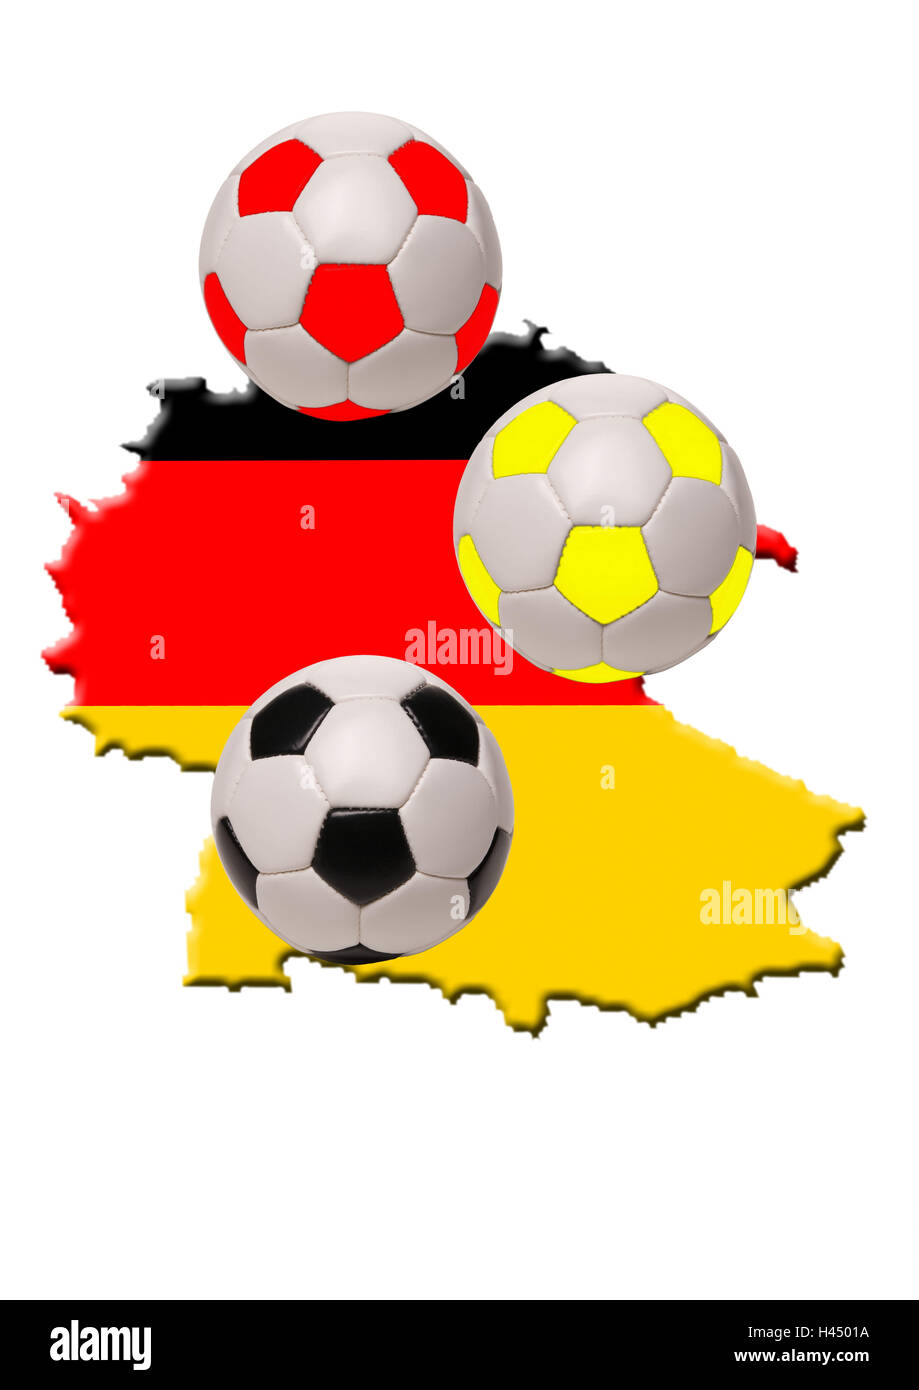 Germany card, footballs,,  National colors,  Map, outlines, Germany, black red gold, balls, leather balls, symbol, soccer game, soccer games, sport, team sport, WM, Fußball-WM, 2006, federal league, studio, free plates, Stock Photo